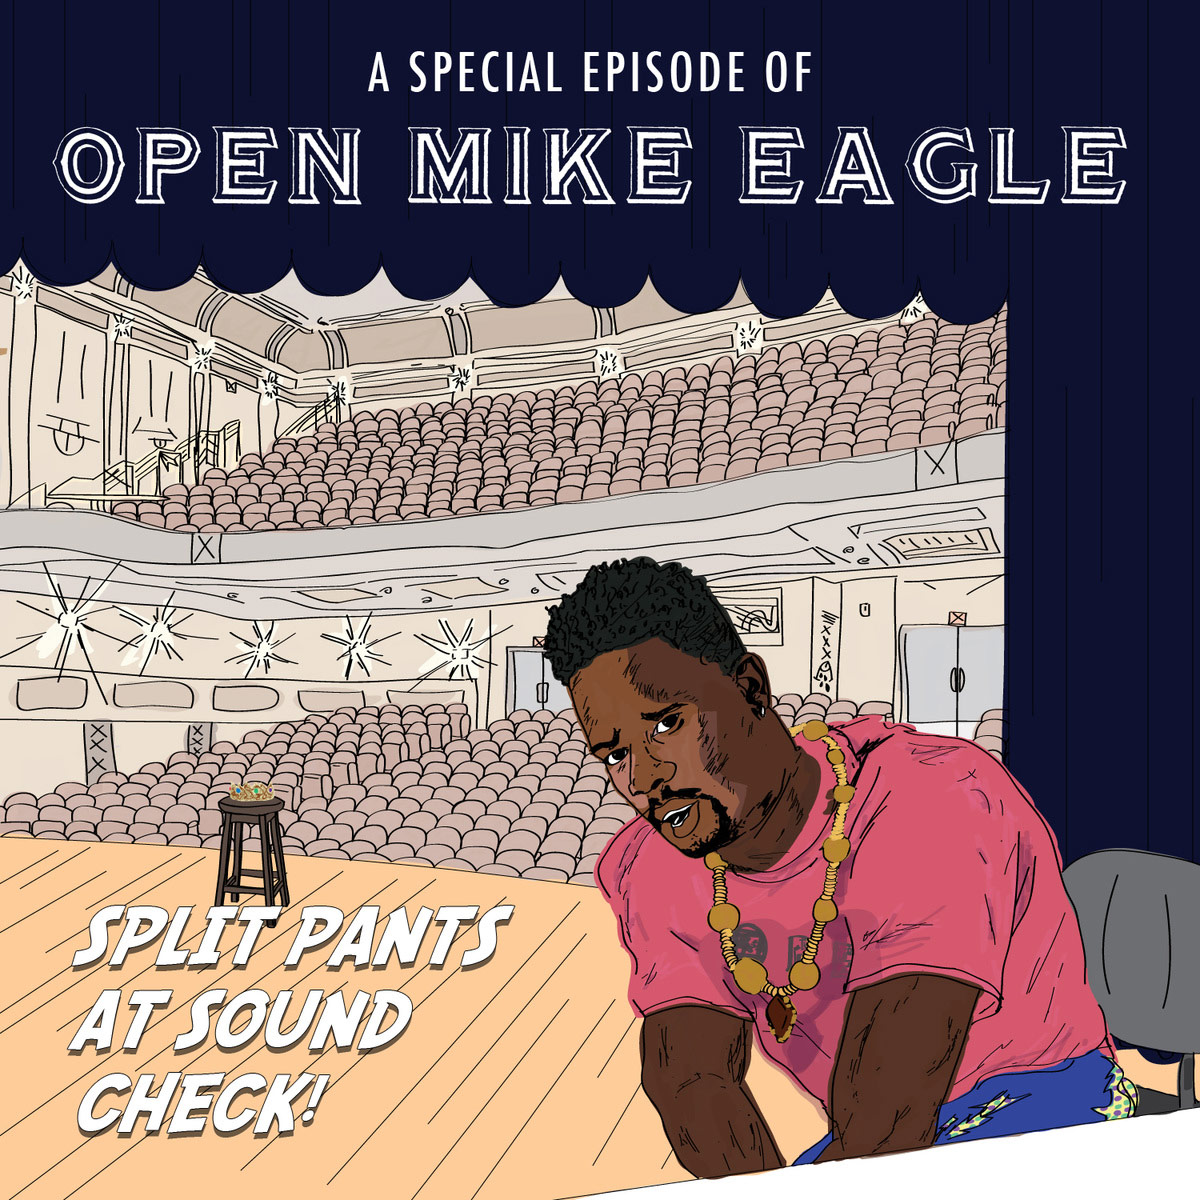 Open Mike Eagle’s latest EP, A Special Episode Of